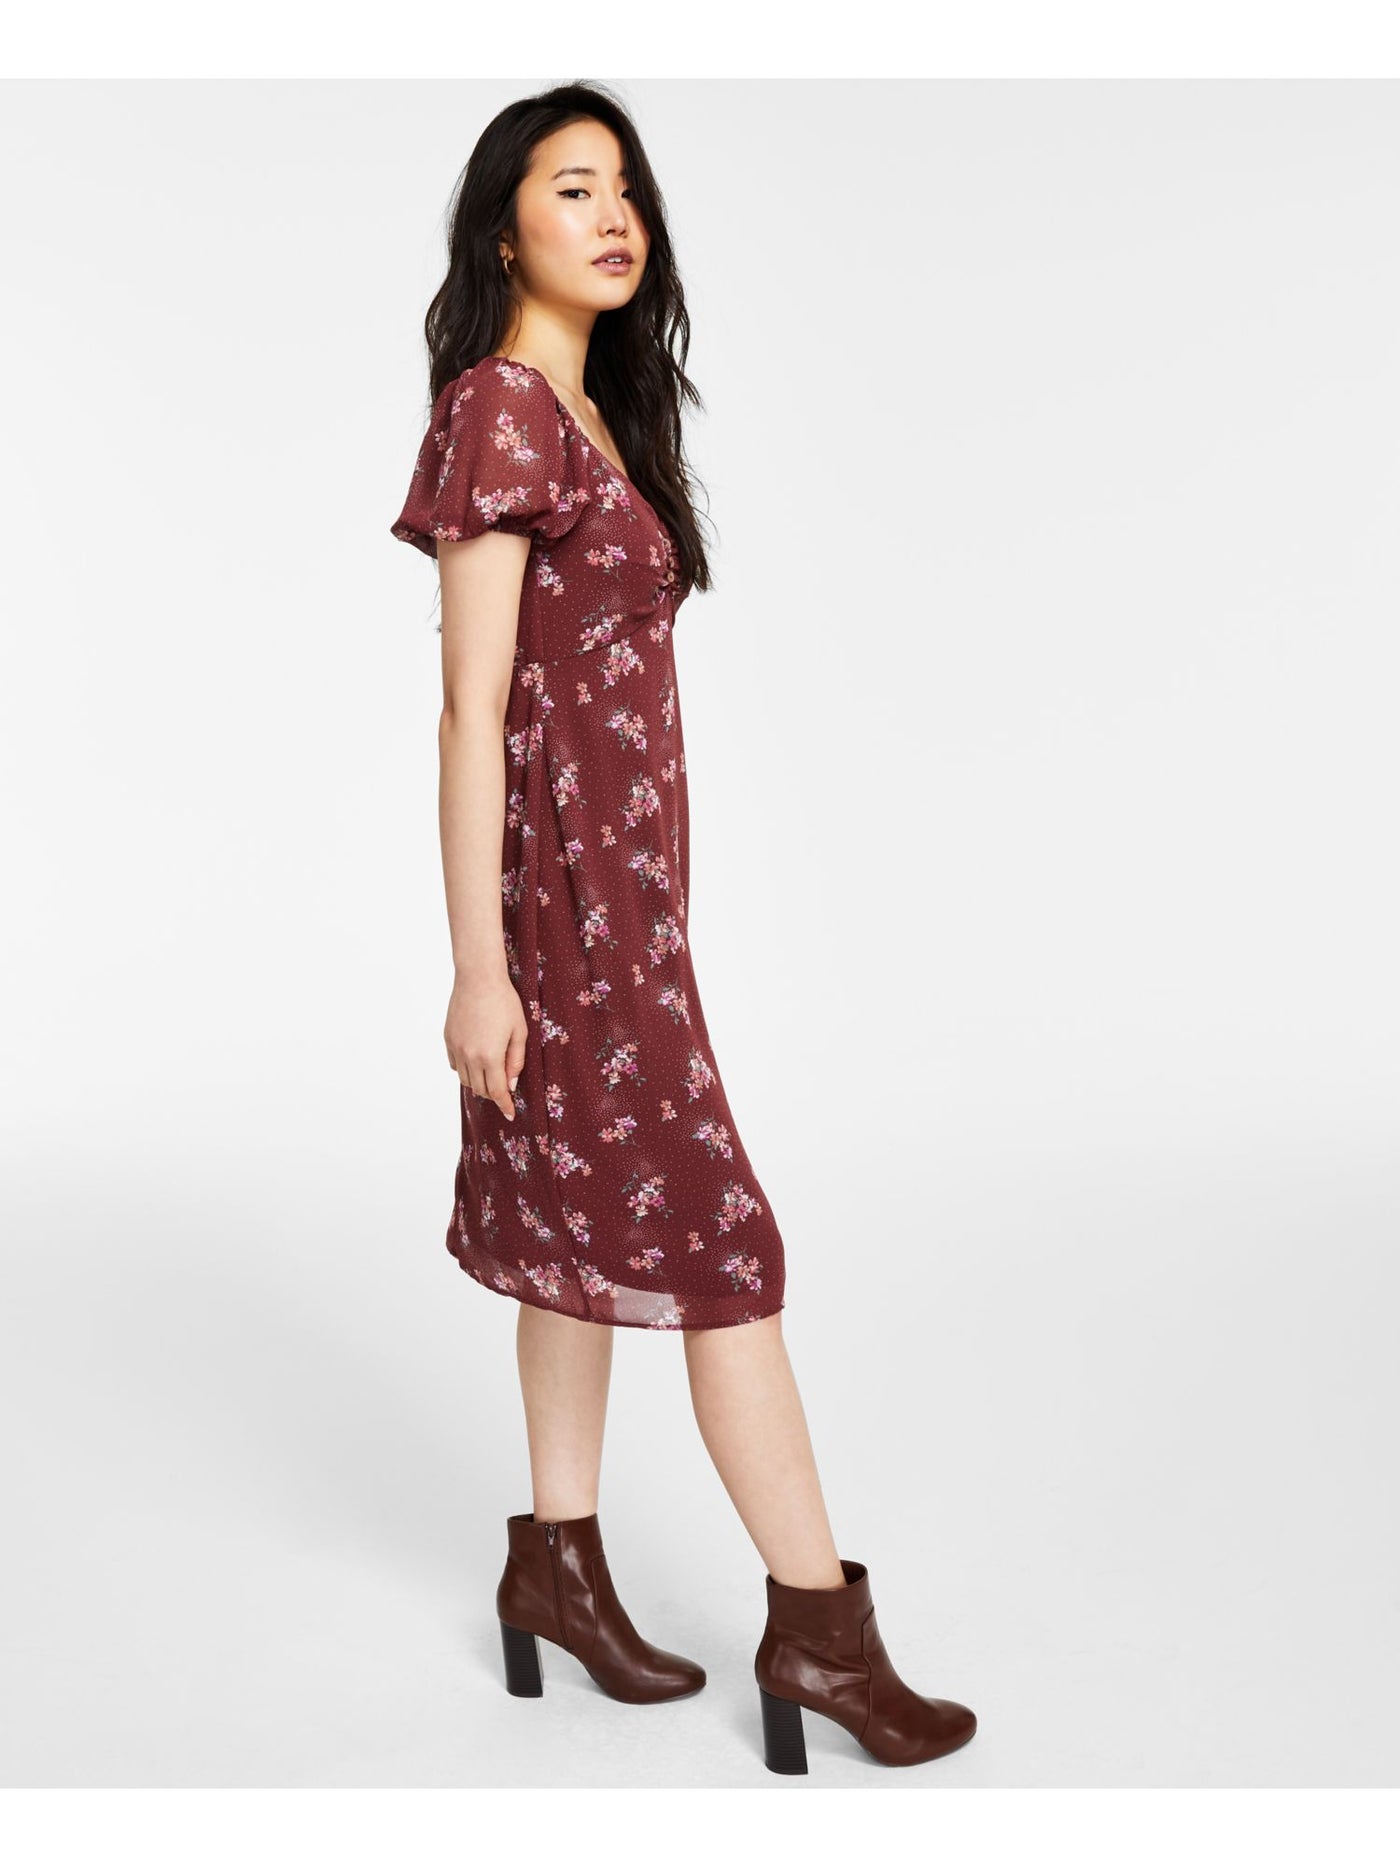 KIT + SKY Womens Maroon Slitted Lined Floral Short Sleeve V Neck Below The Knee Faux Wrap Dress Juniors M